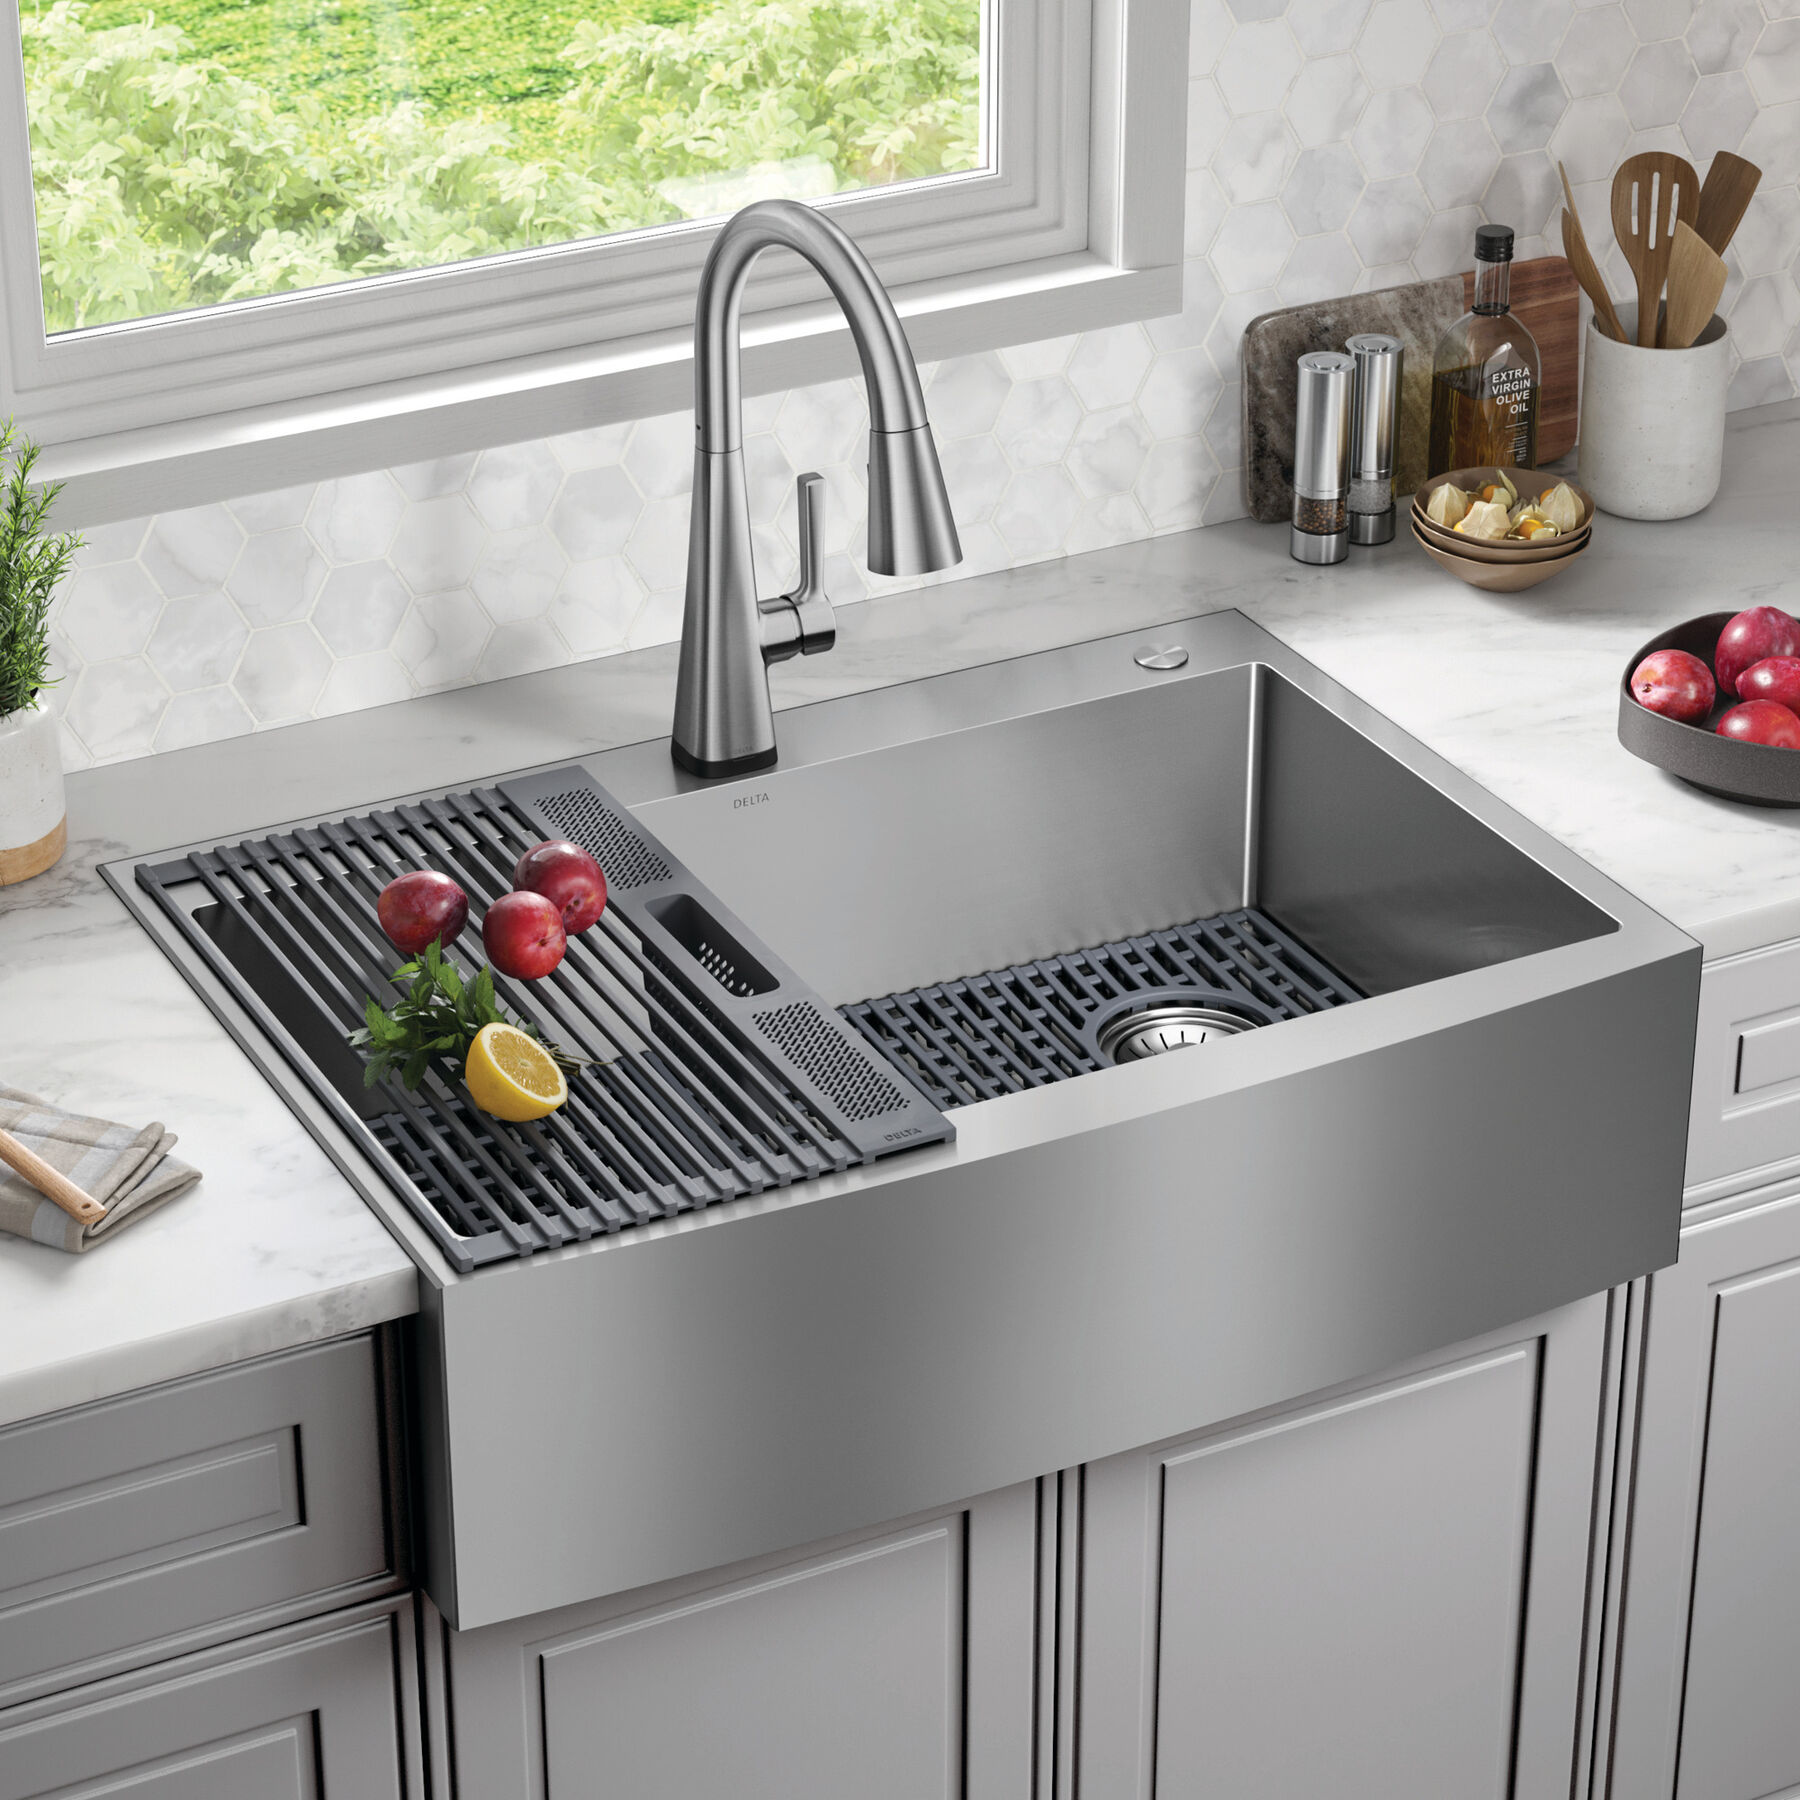 Ultimate Sink Cover - Stainless - Havens